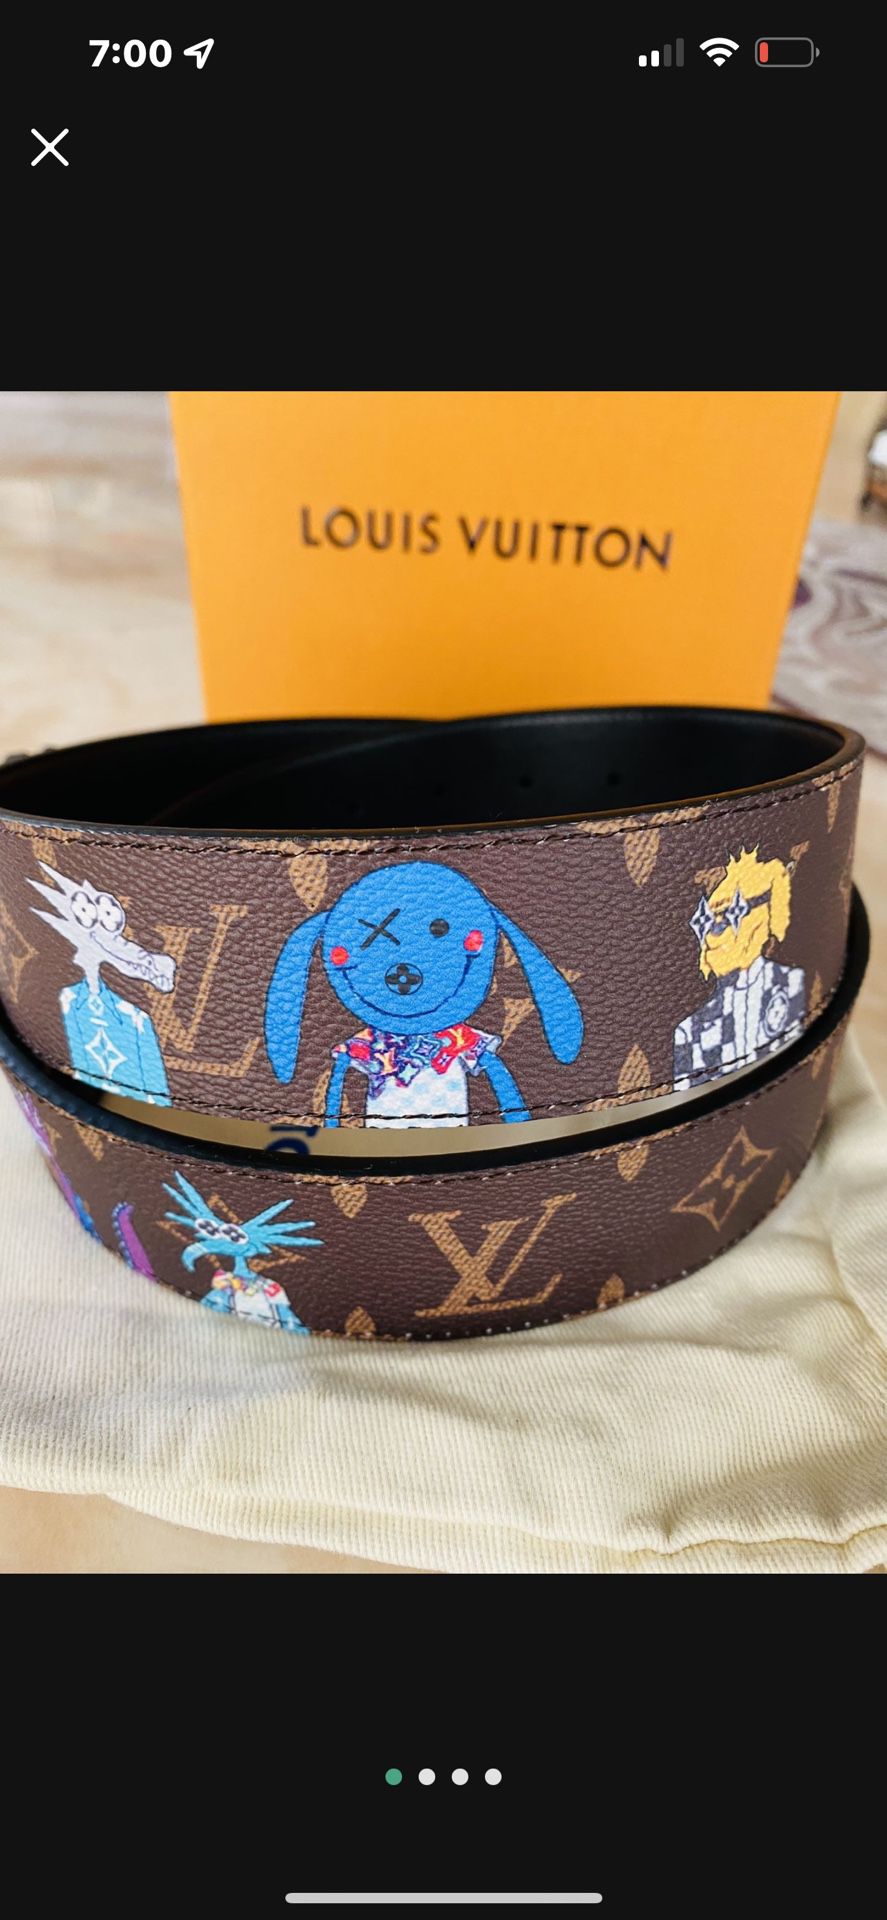 Louis Vuitton MEN&WOMEN BAGS LEATHER BELTS BAG for 10.00 USD Sale -  #1000163032 - Sellao - Buy and Sell Online …